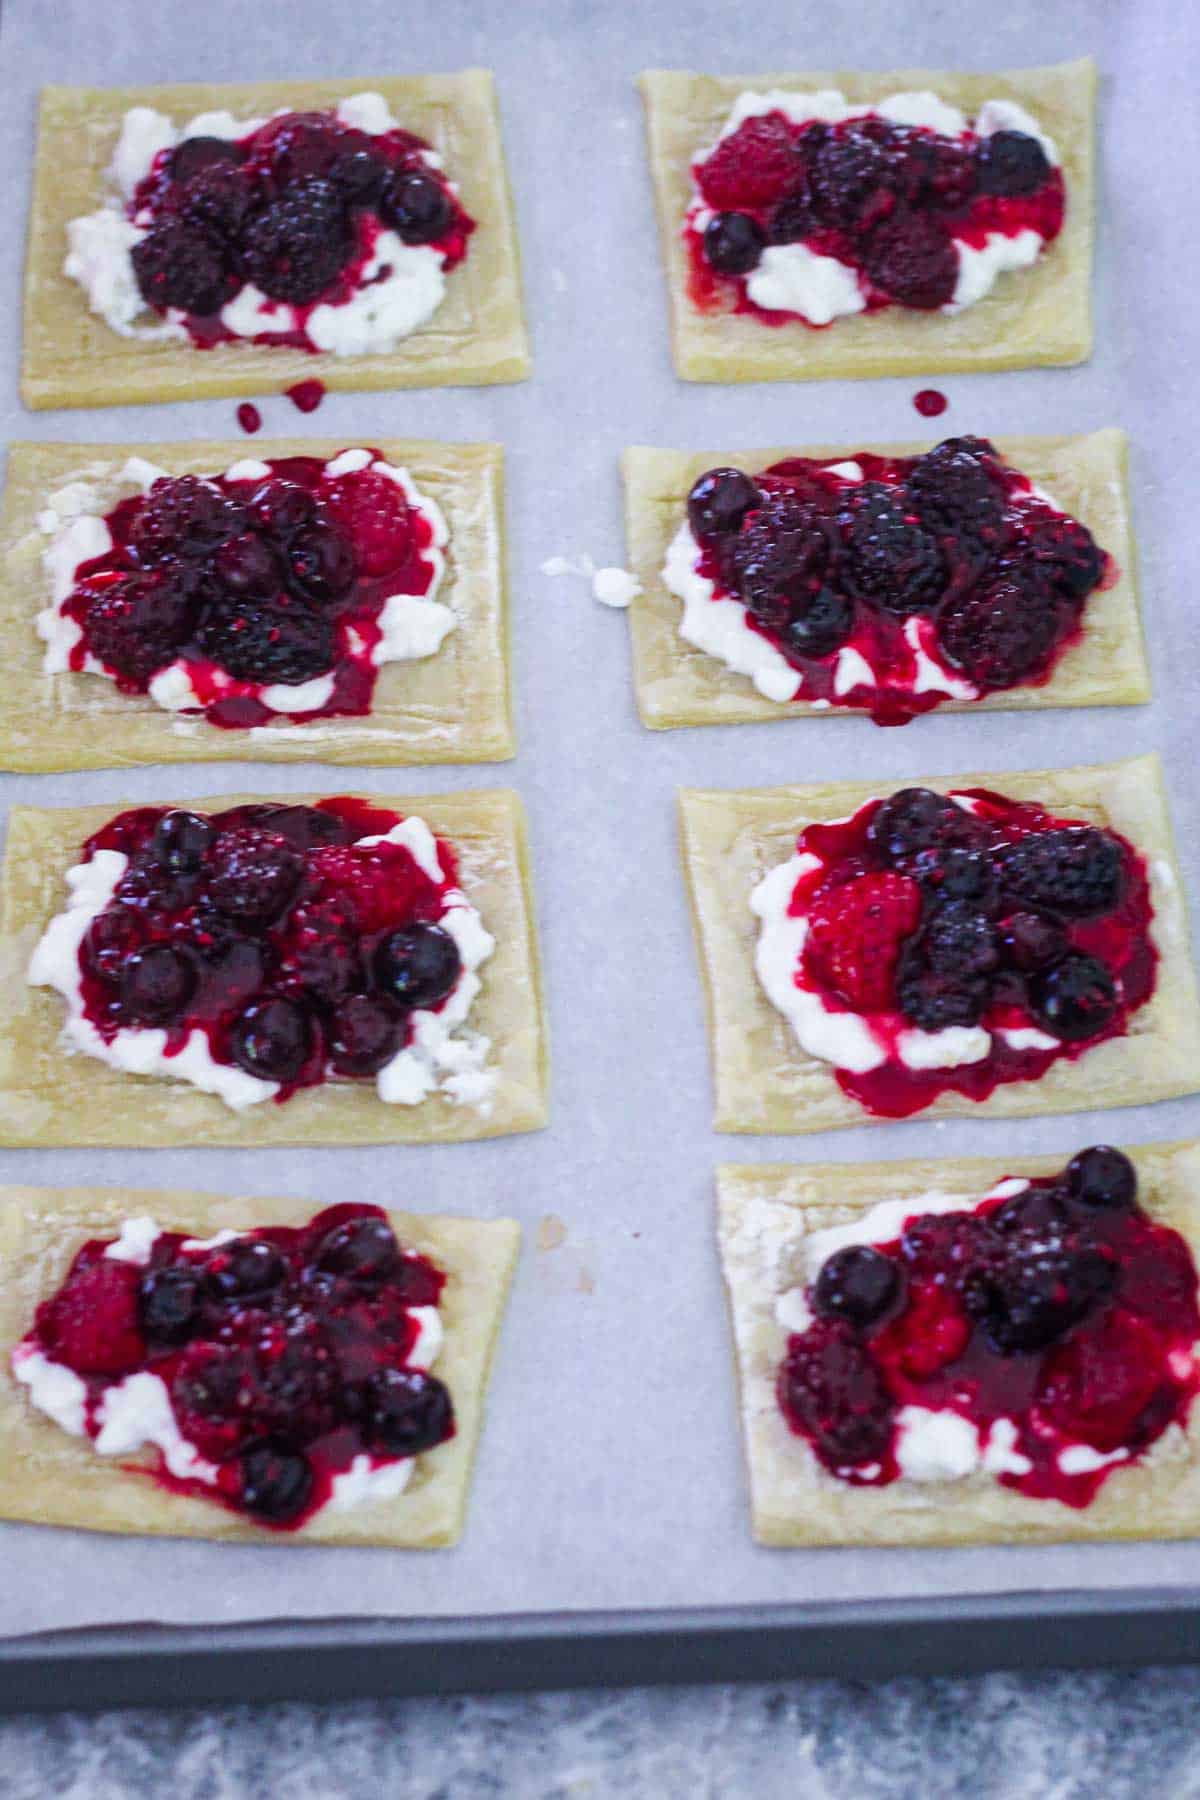 Puff pastry tarts shown with cottage cheese on top and mixed berries filling, before baking. 